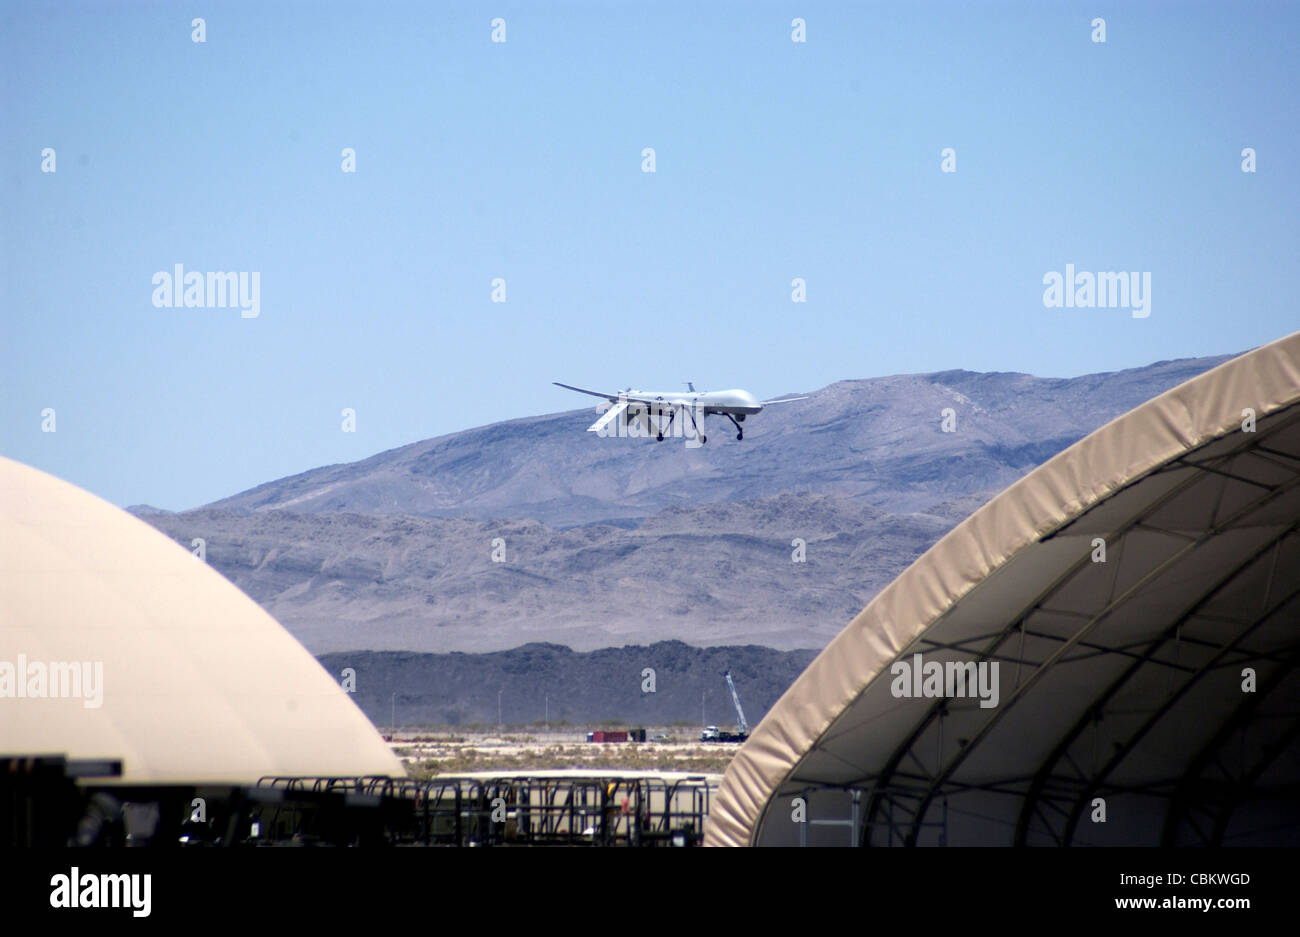 An MQ-1 Predator conducts a low pass commemorating the 250,000th flight hour of the airframe June 22 at Creech Air Force Base, Nev. The Predator is assigned to the 11th Reconnaissance Squadron at Creech AFB. When the Predator is not actively pursuing its primary mission, it acts as the joint forces air component commander-owned theater asset for reconnaissance, surveillance and target acquisition in support of the joint forces commander. Stock Photo